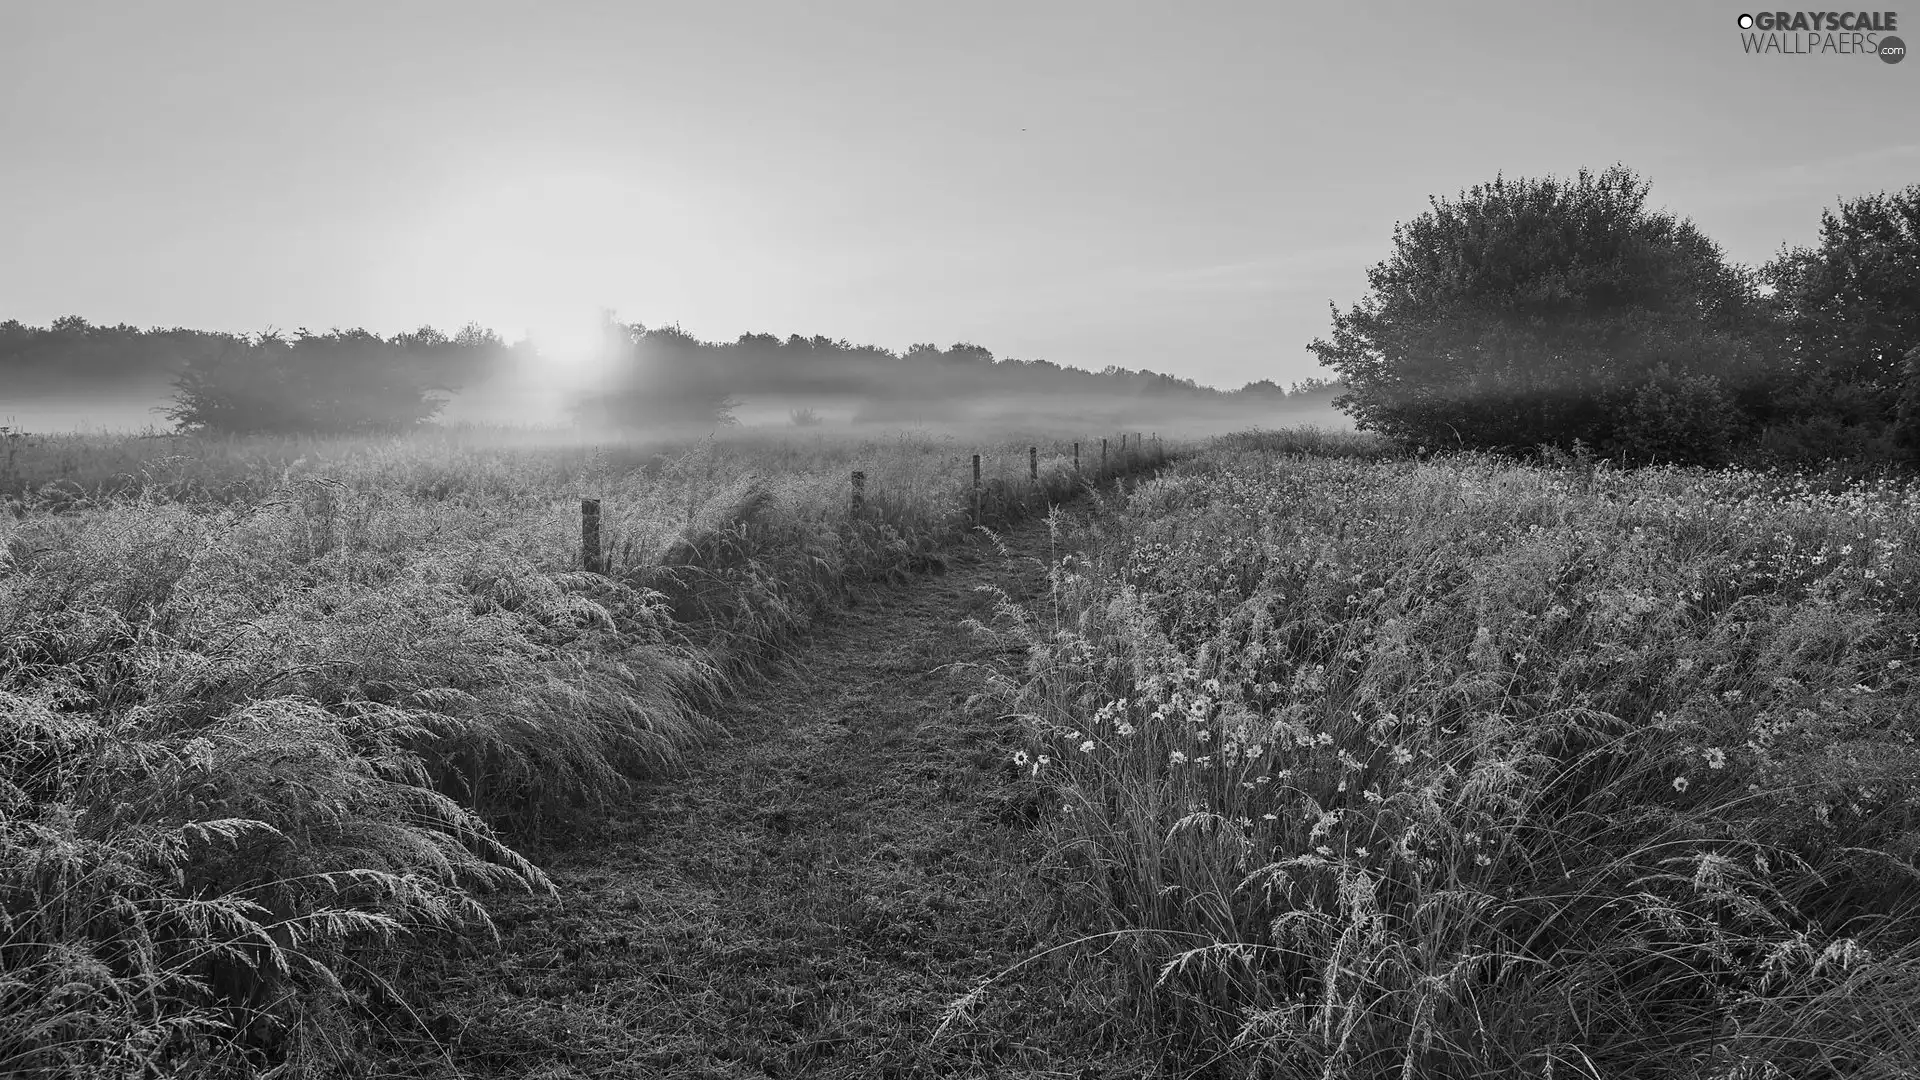 Fog, Sunrise, Meadow, grass, trees, viewes, Flowers, Way, White